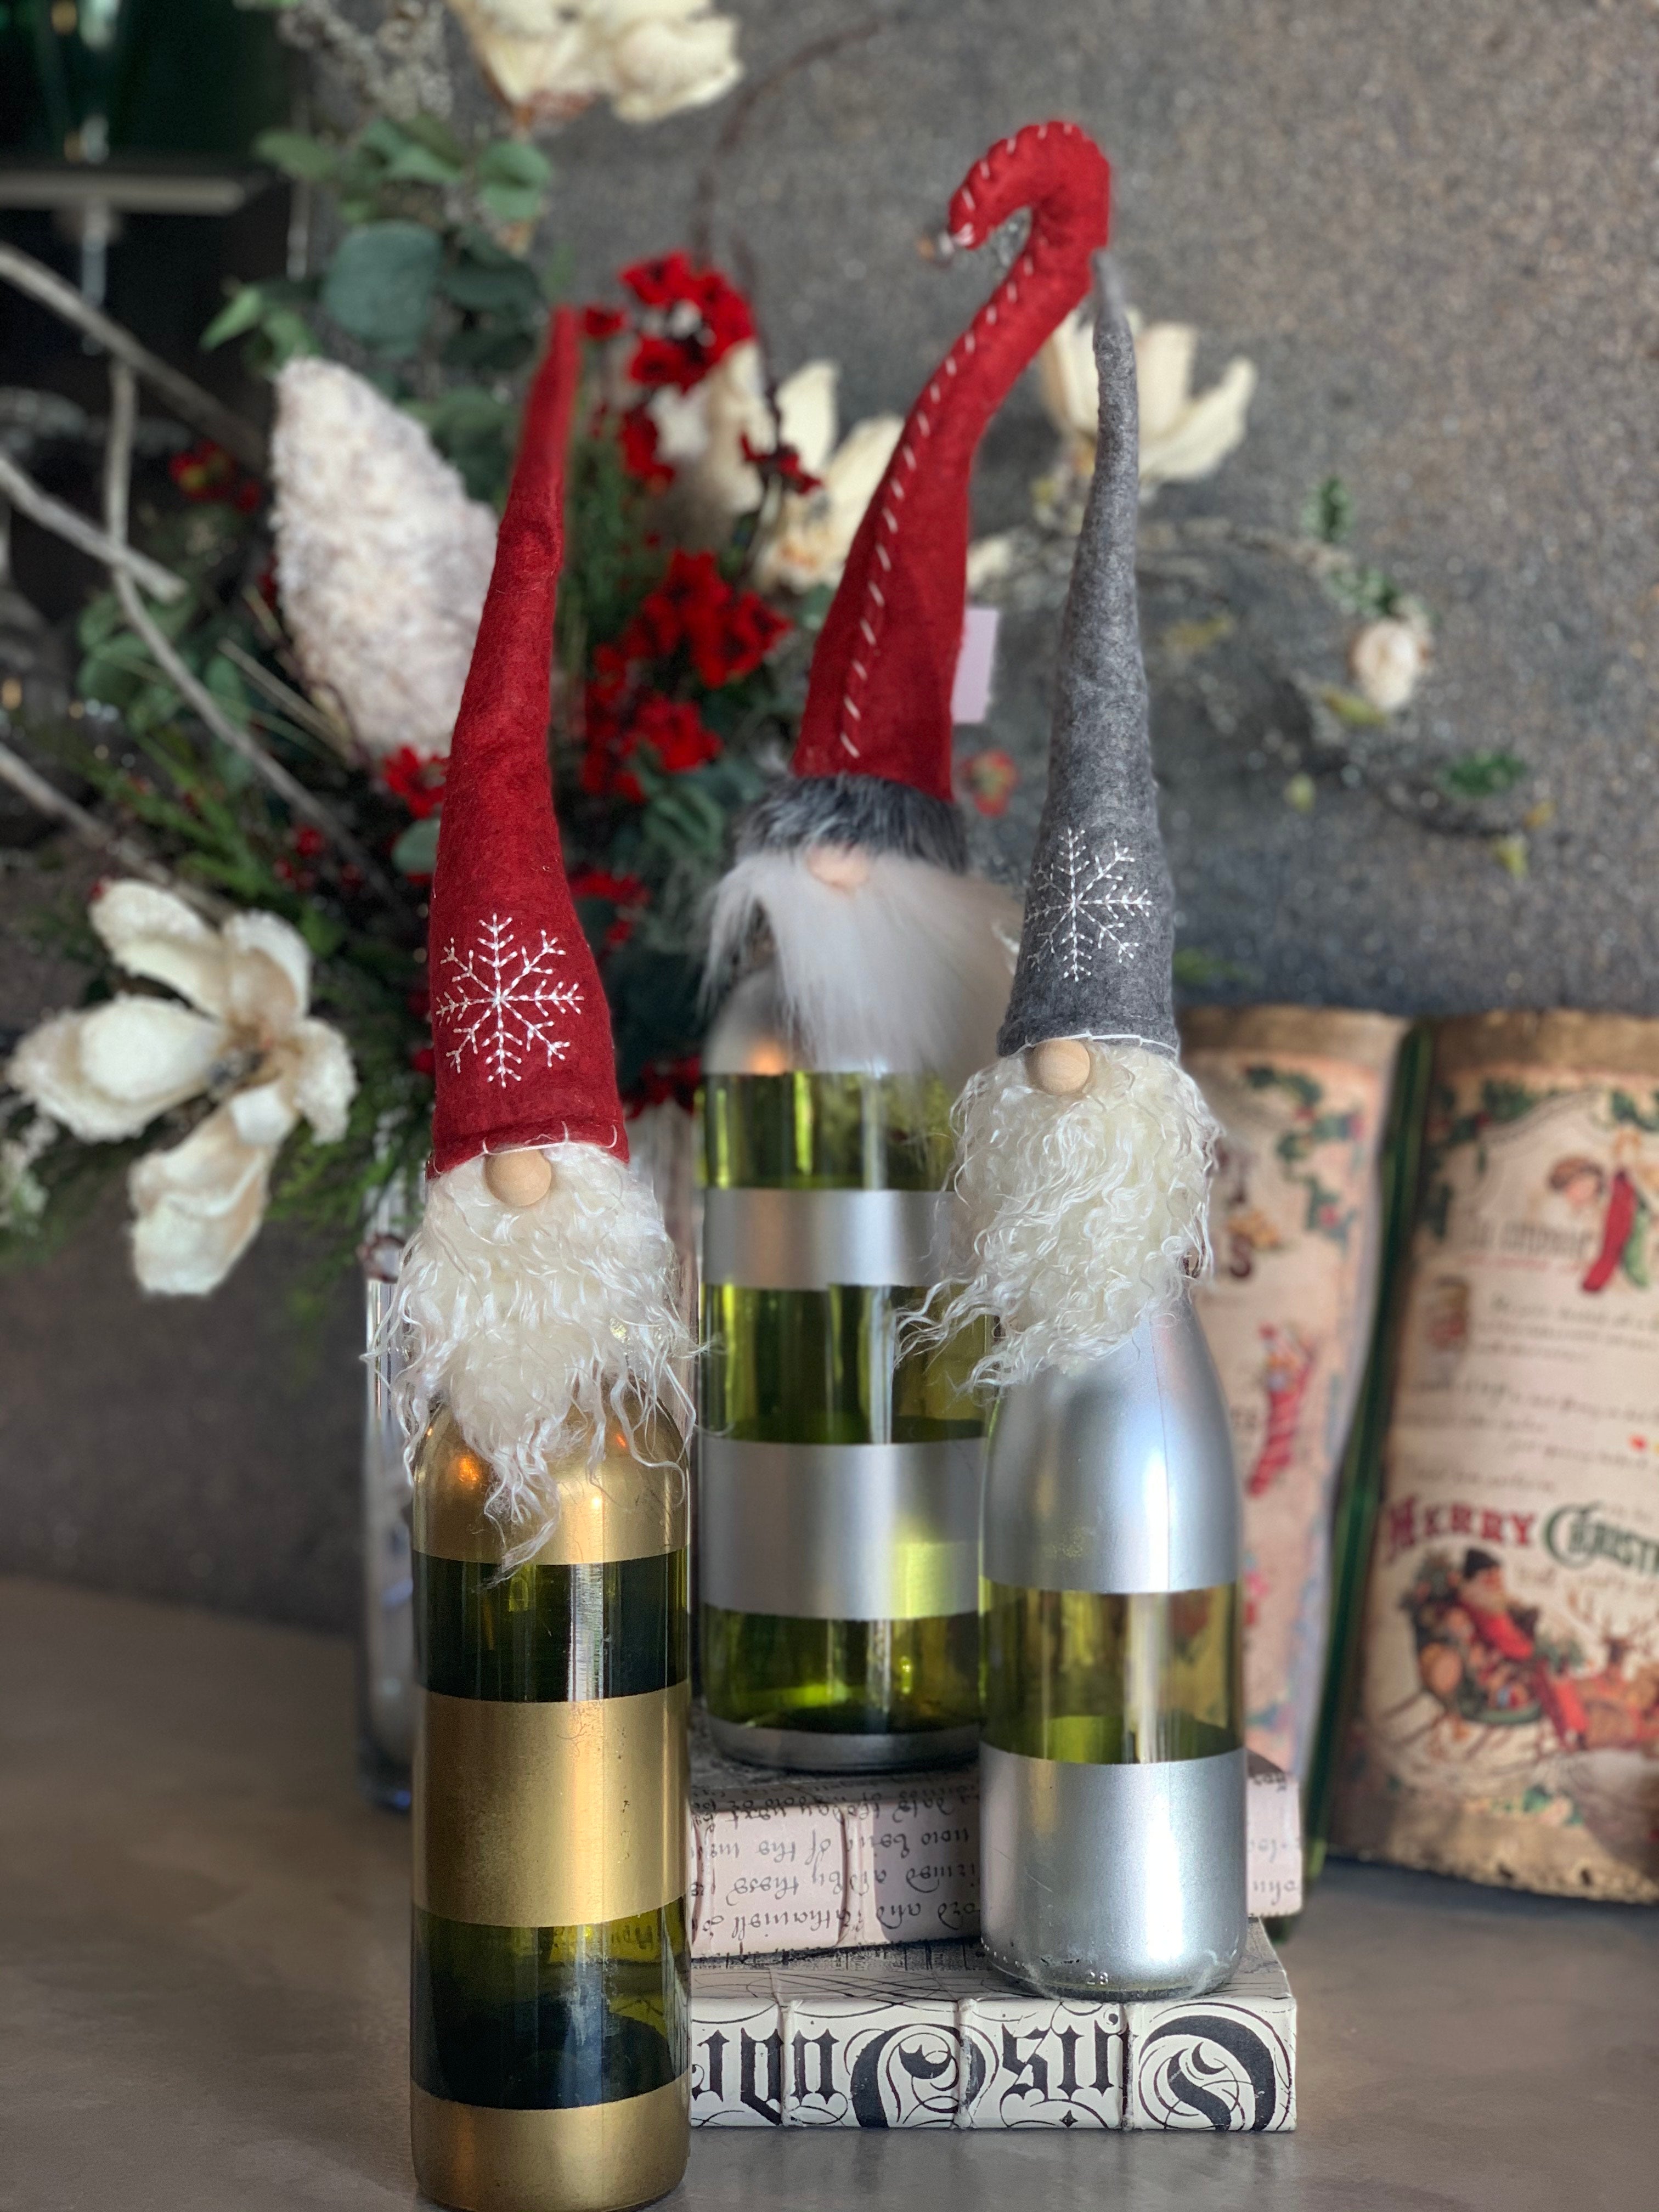 SET OF 3 RED AND GRAY BOTTLE TOPPERS